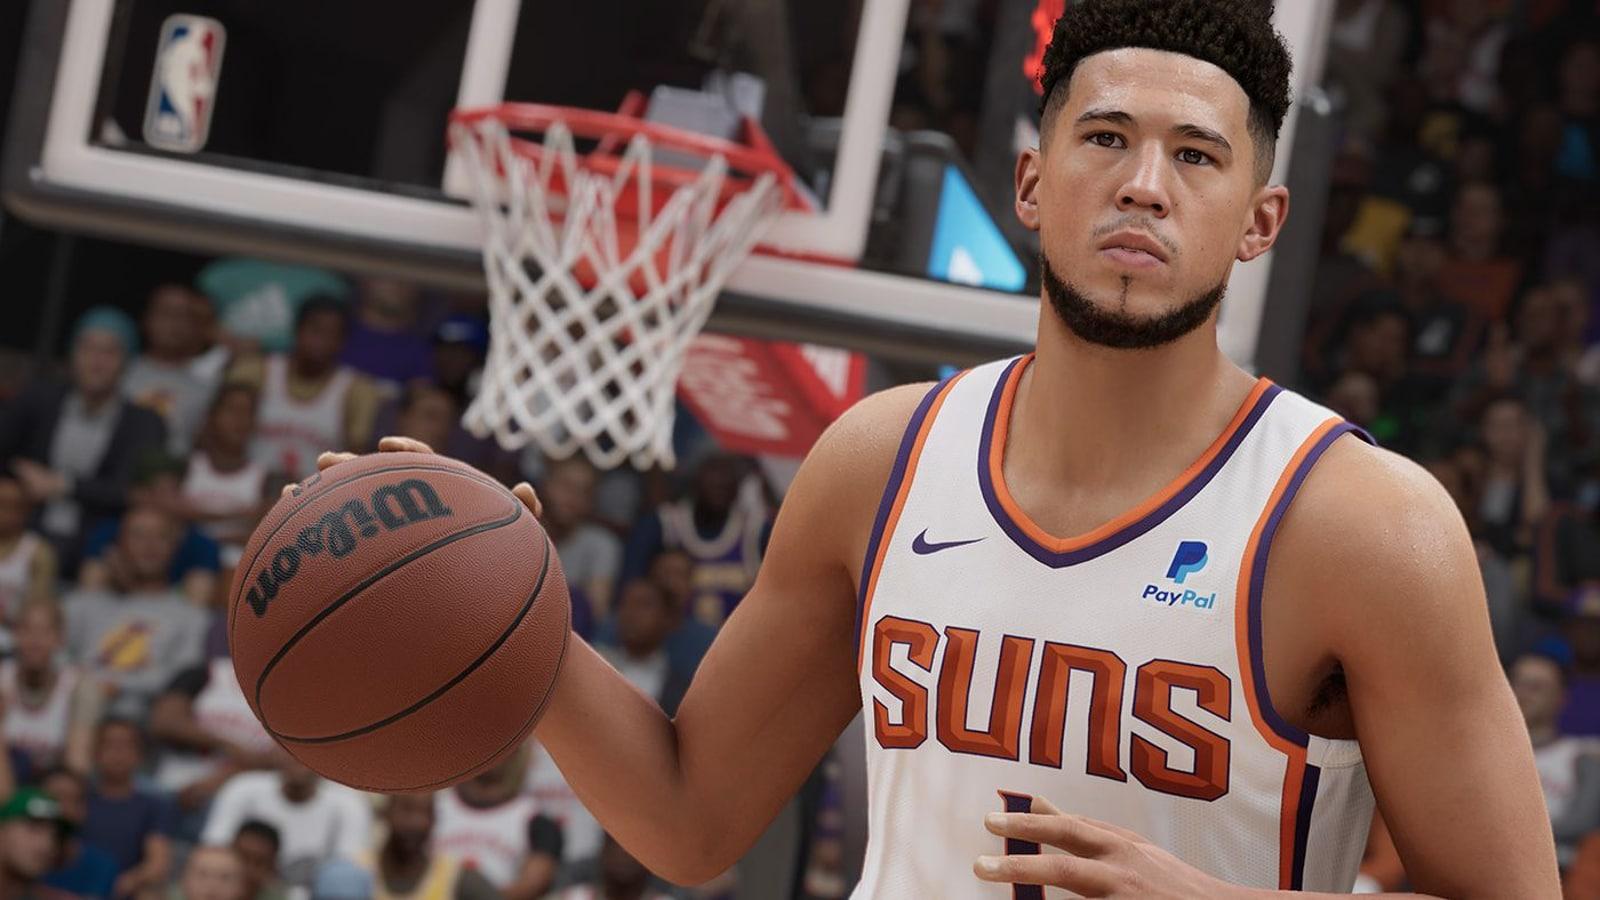 Devin Booker of the Phoenix Suns dribbling a ball in NBA 2K23